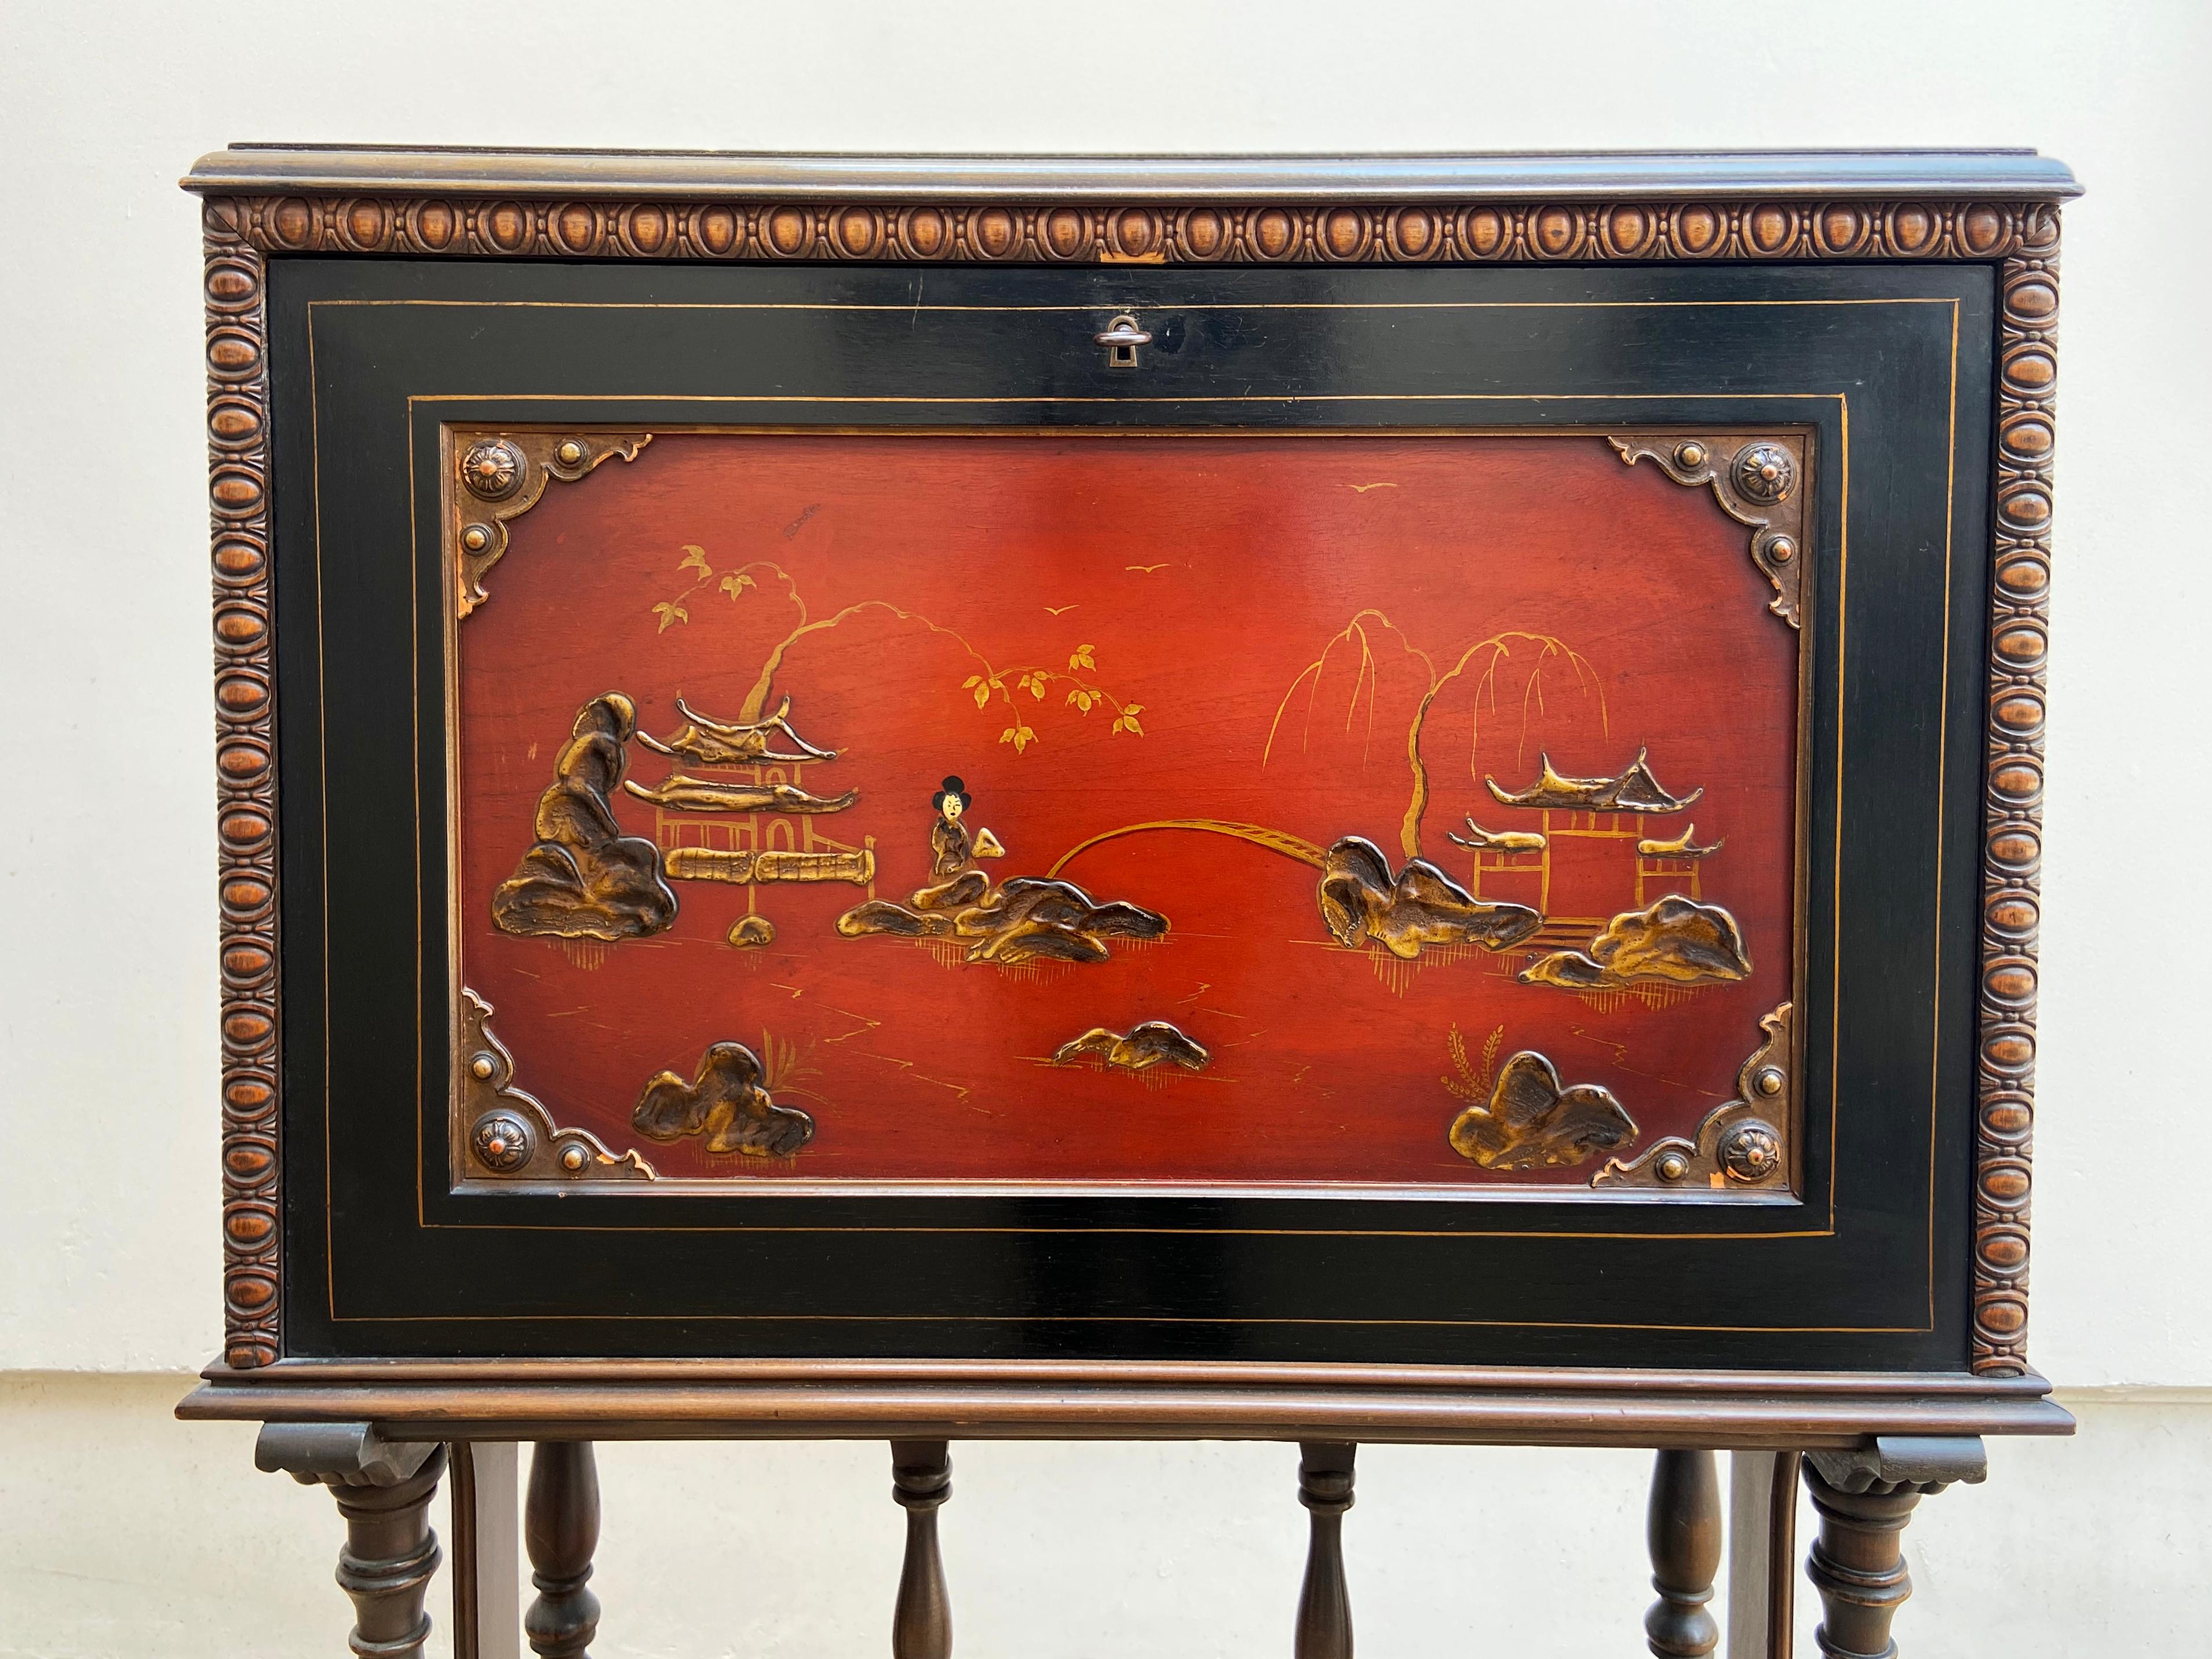 Carved wood and hand painted writing desk, c. 1920 by the historic Rockford Furniture company of Illinois. This uncommon style is from Rockford's line of Chinoiserie furniture. Original key included. 

This wonderful piece was acquired from the